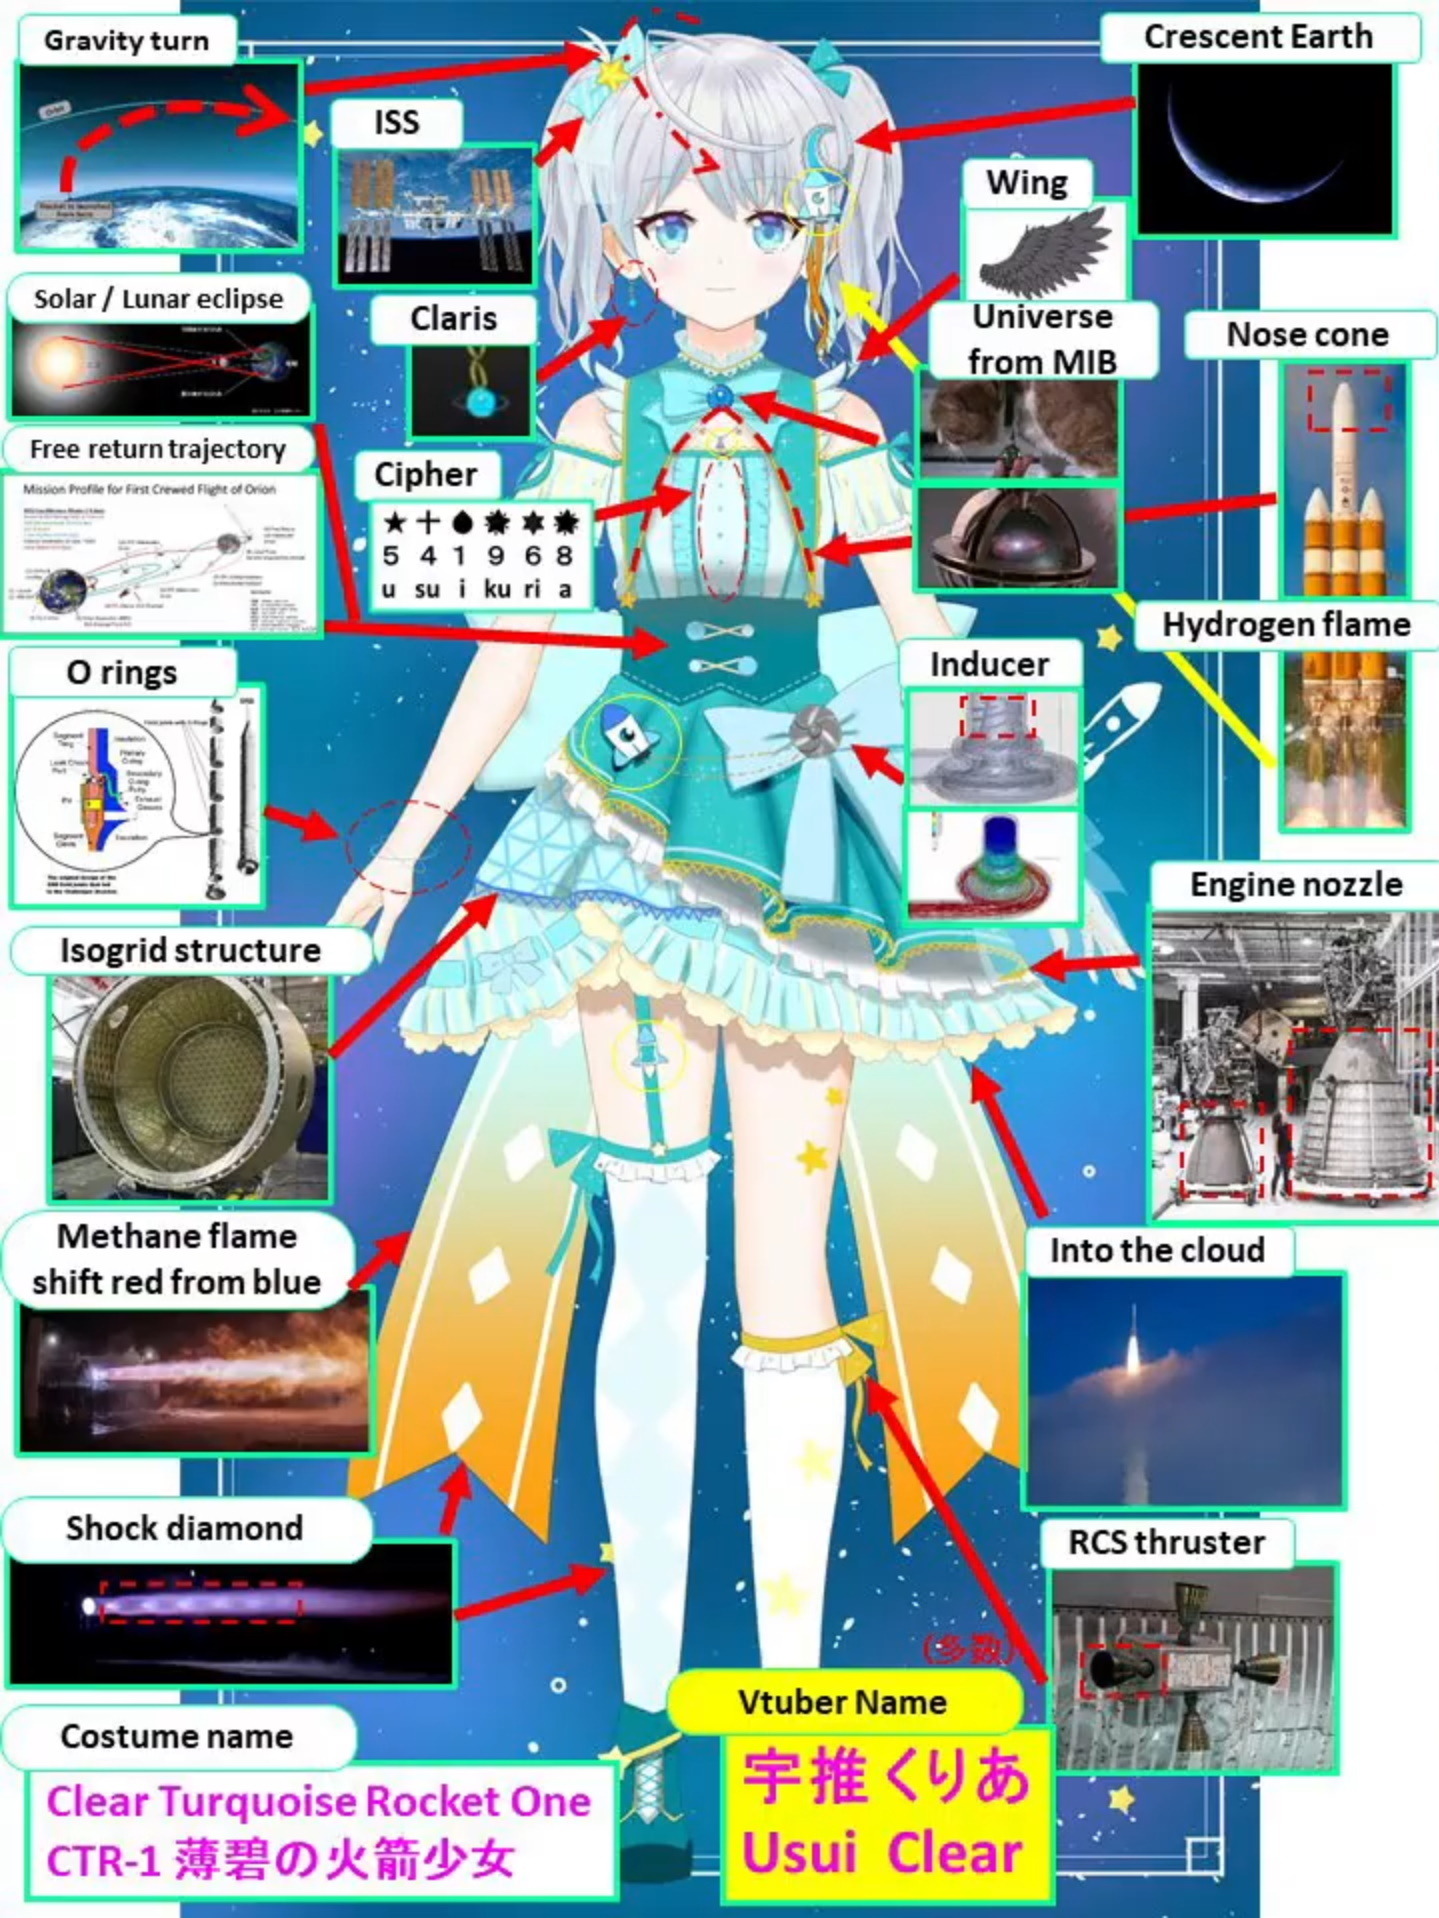 uss-edsall:Shoutout to this one vtuber space nerd who designs her own model with